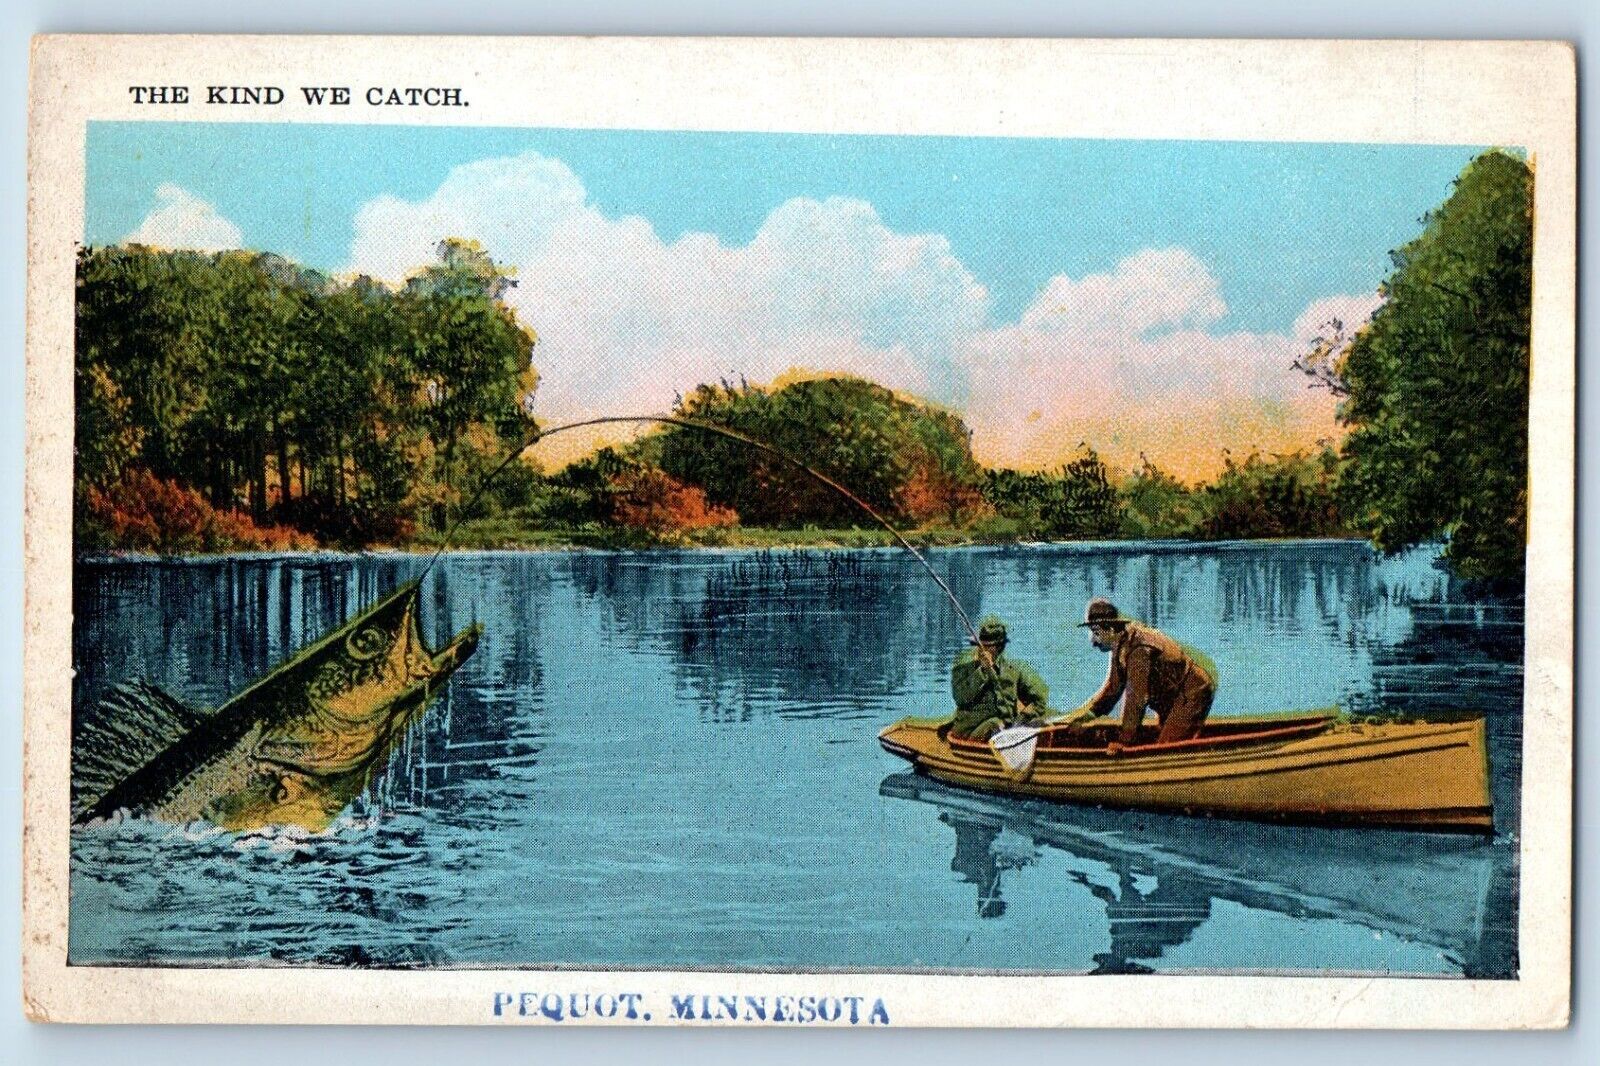 Pequot Minnesota Postcard The Kind We Catch Fishing Exaggerated Boat  Lake 1920